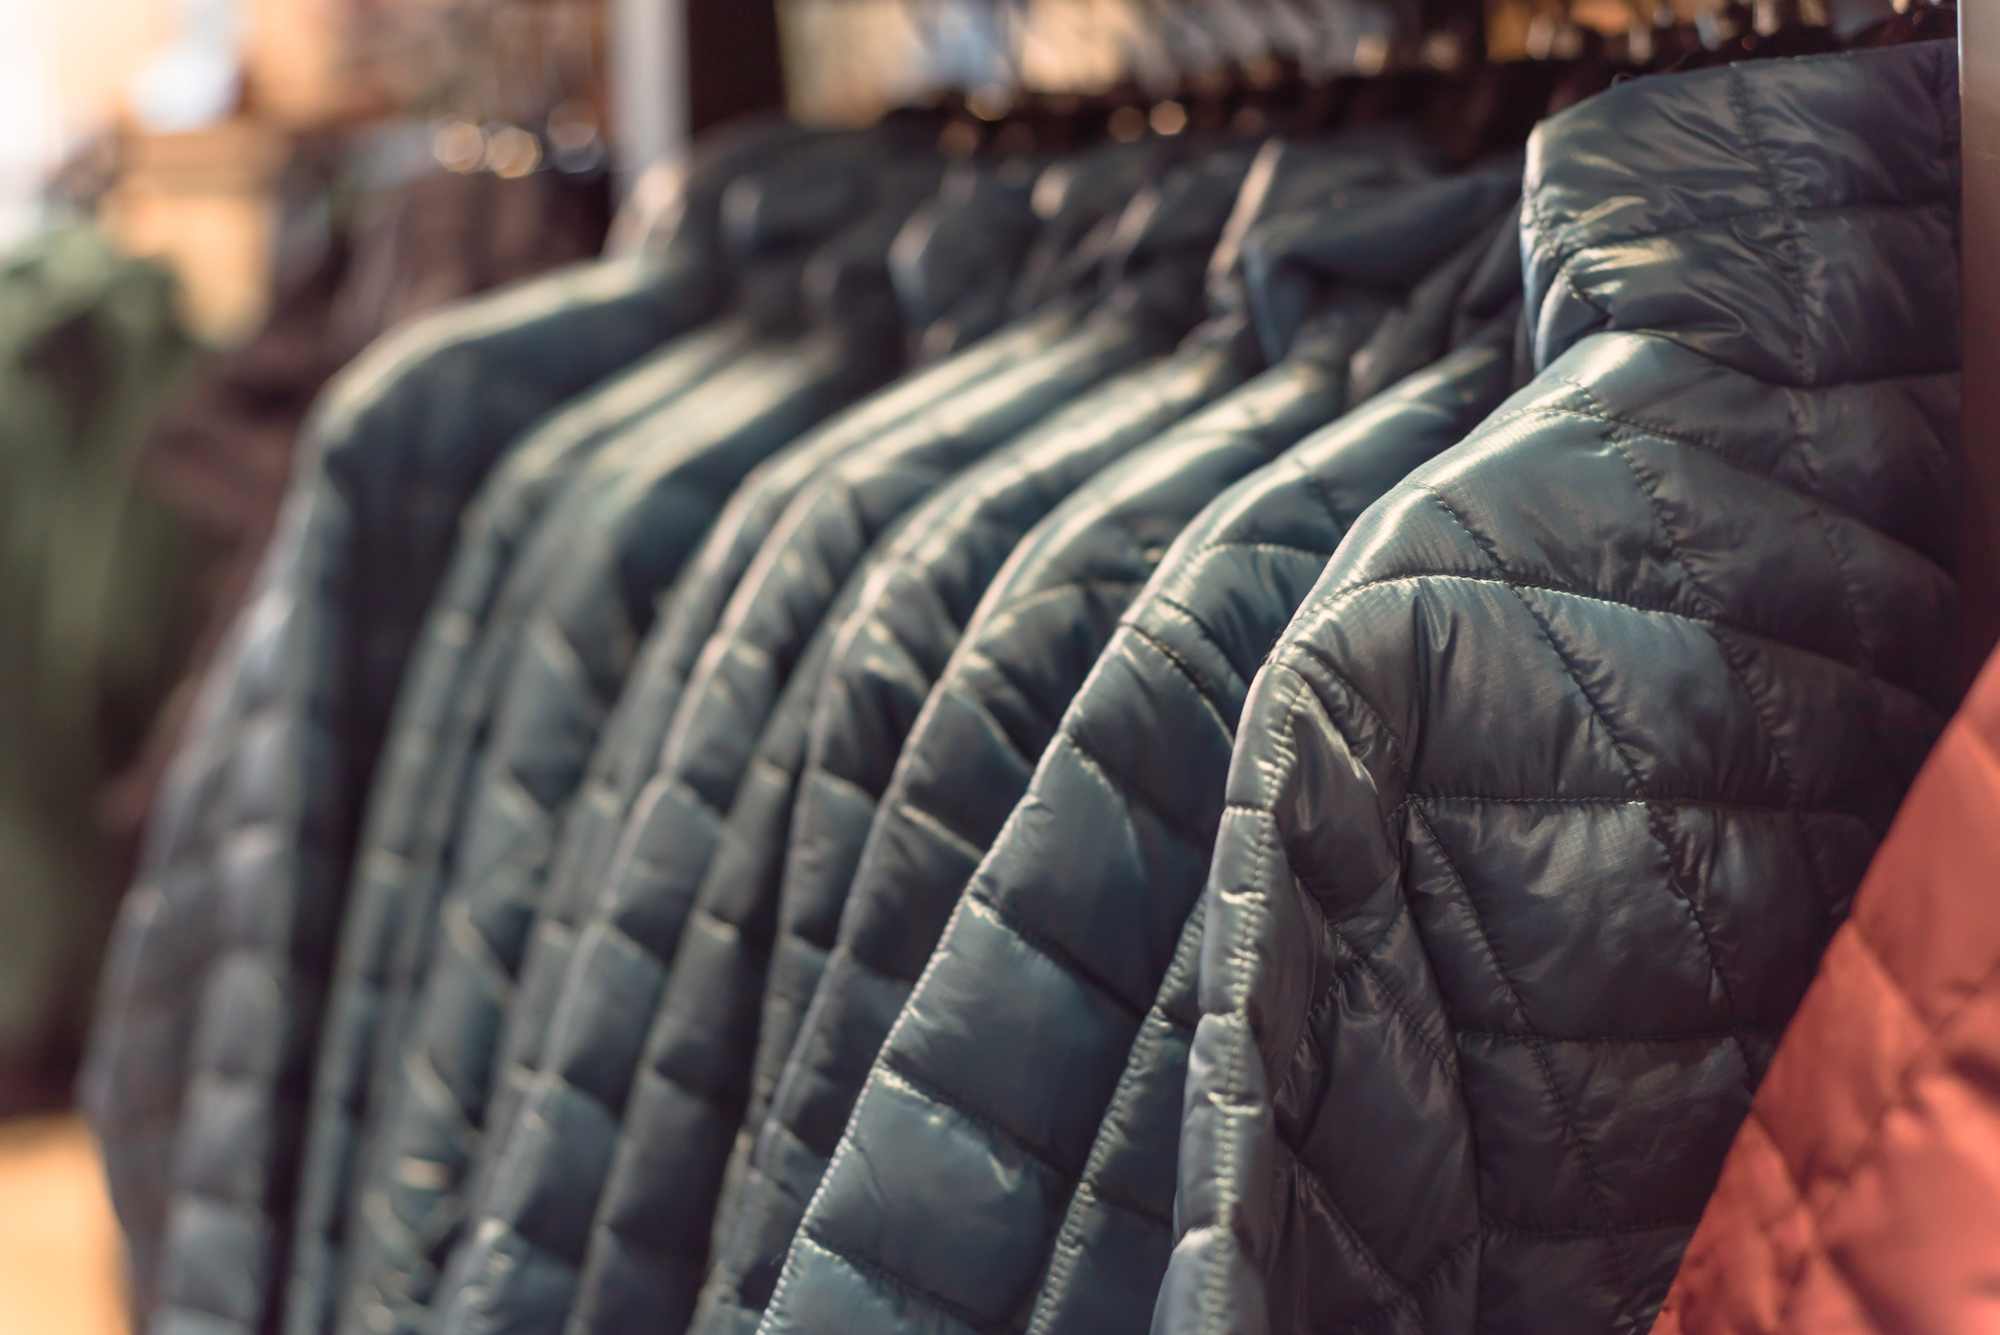 insulated jackets on rack